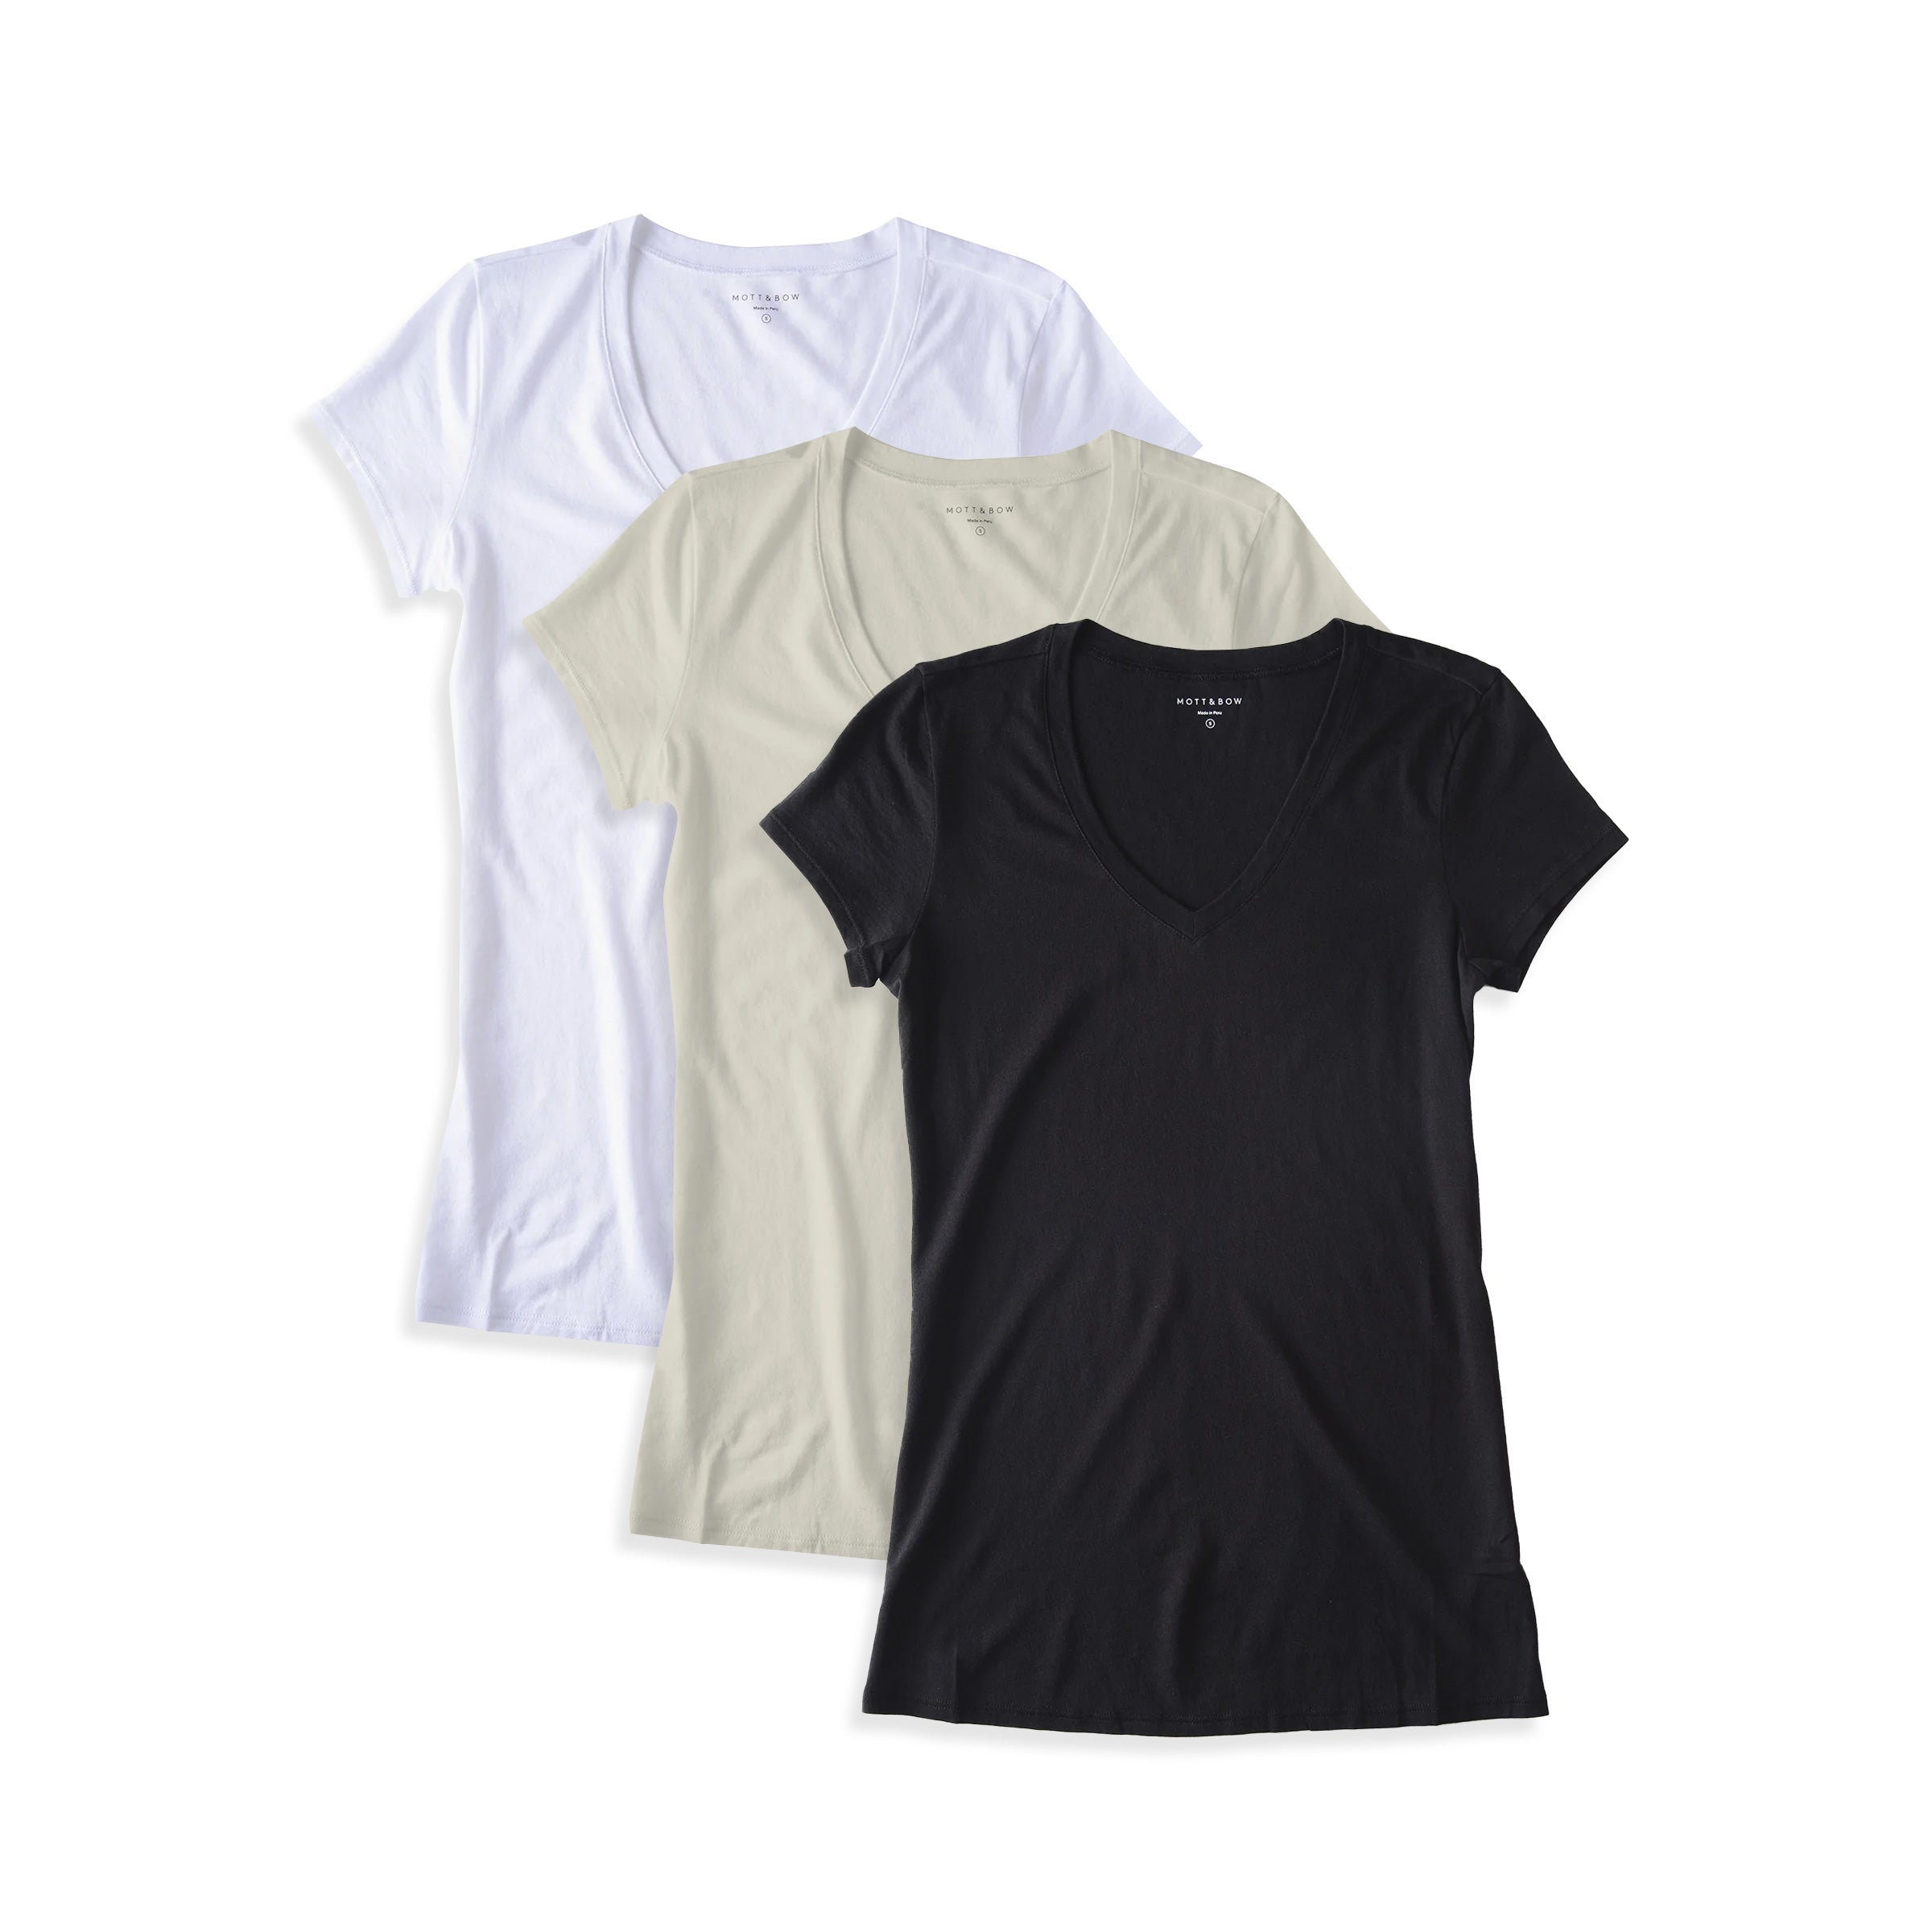 Women wearing Blanc/Blanc Vintage/Noir Fitted V-Neck Marcy 3-Pack tees